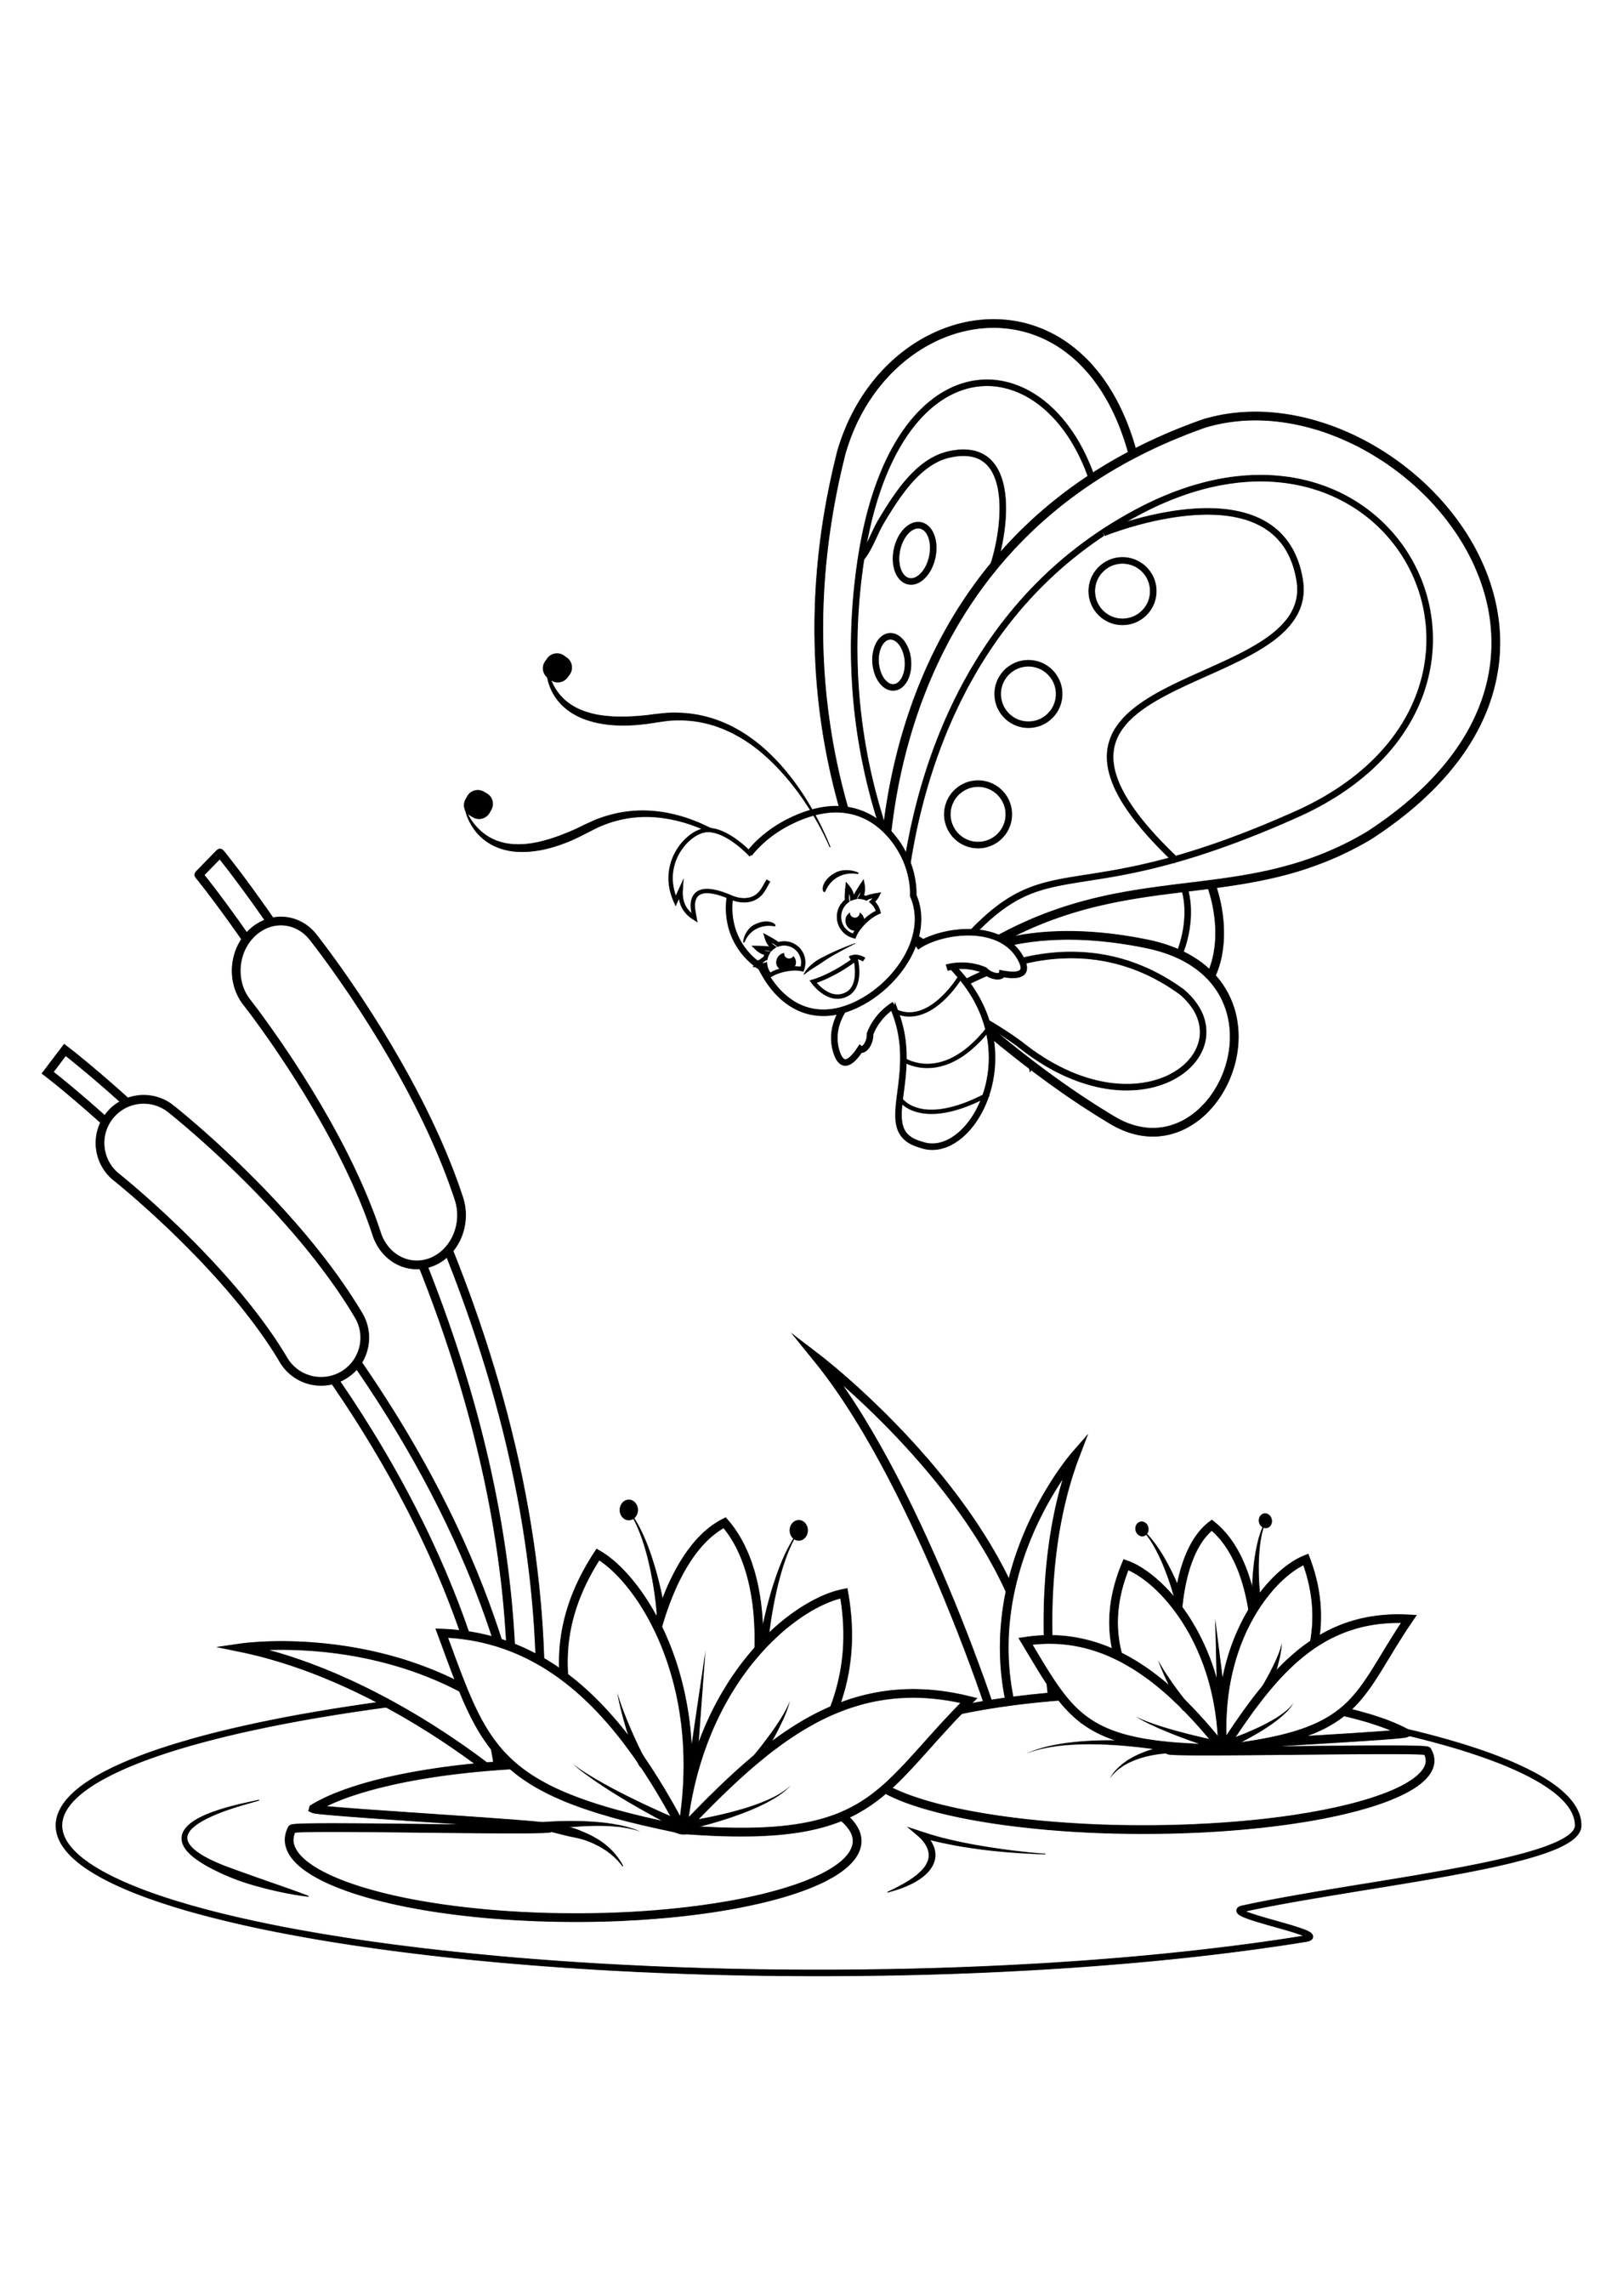 Butterfly Flying Over the River Coloring Sheet